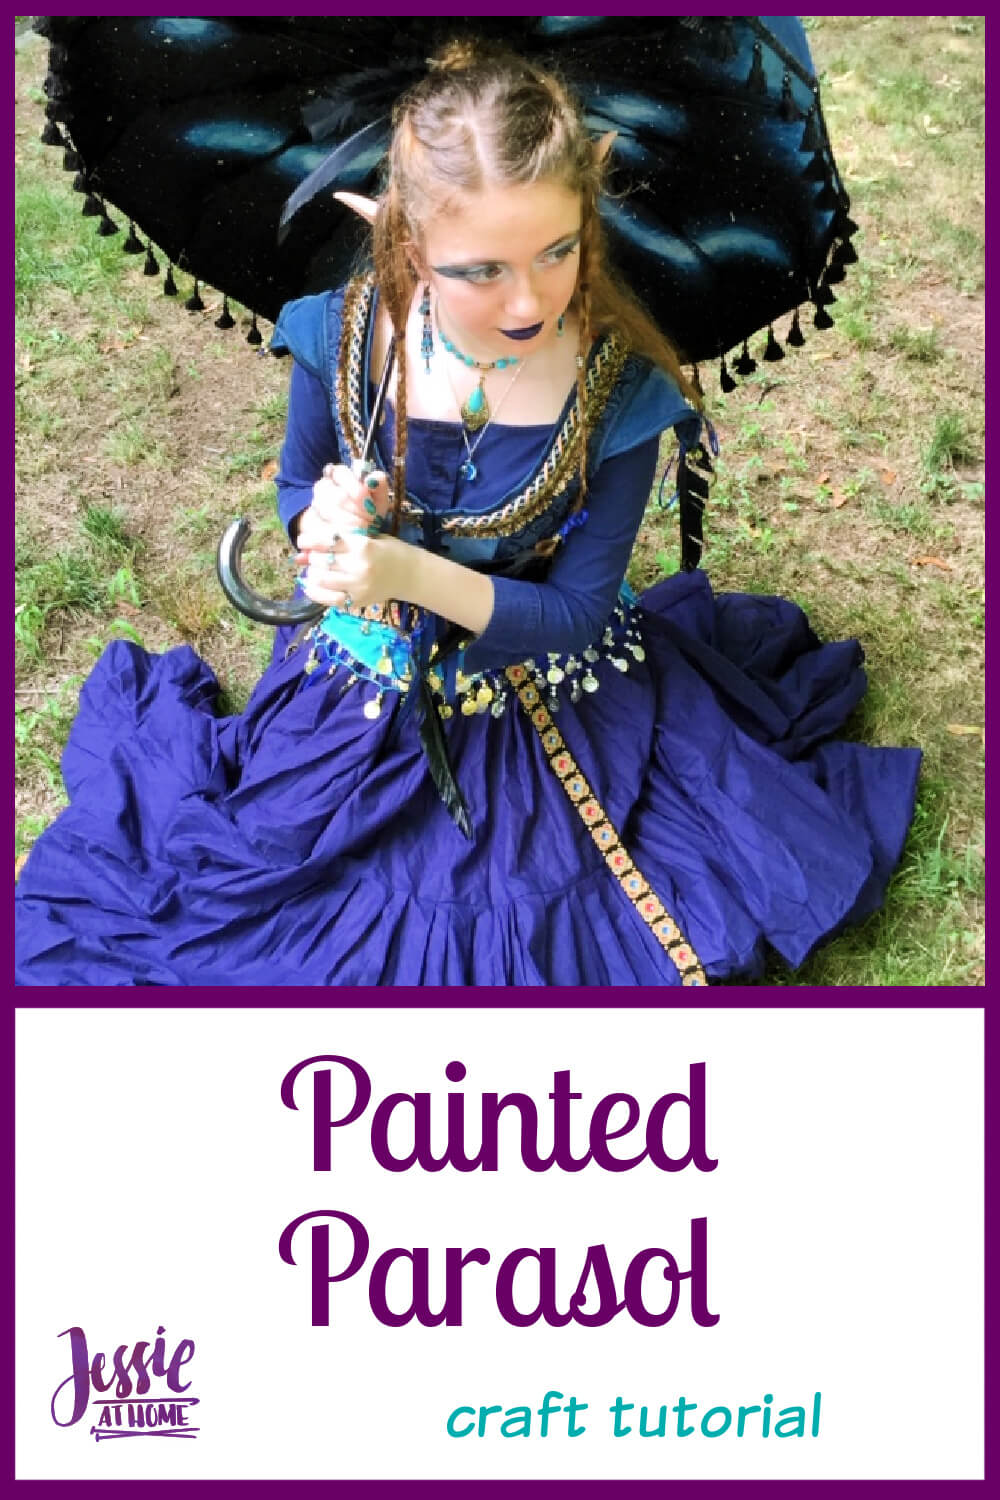 Painted Parasol  - Get mystical with Plaid FX paints and a special guest!